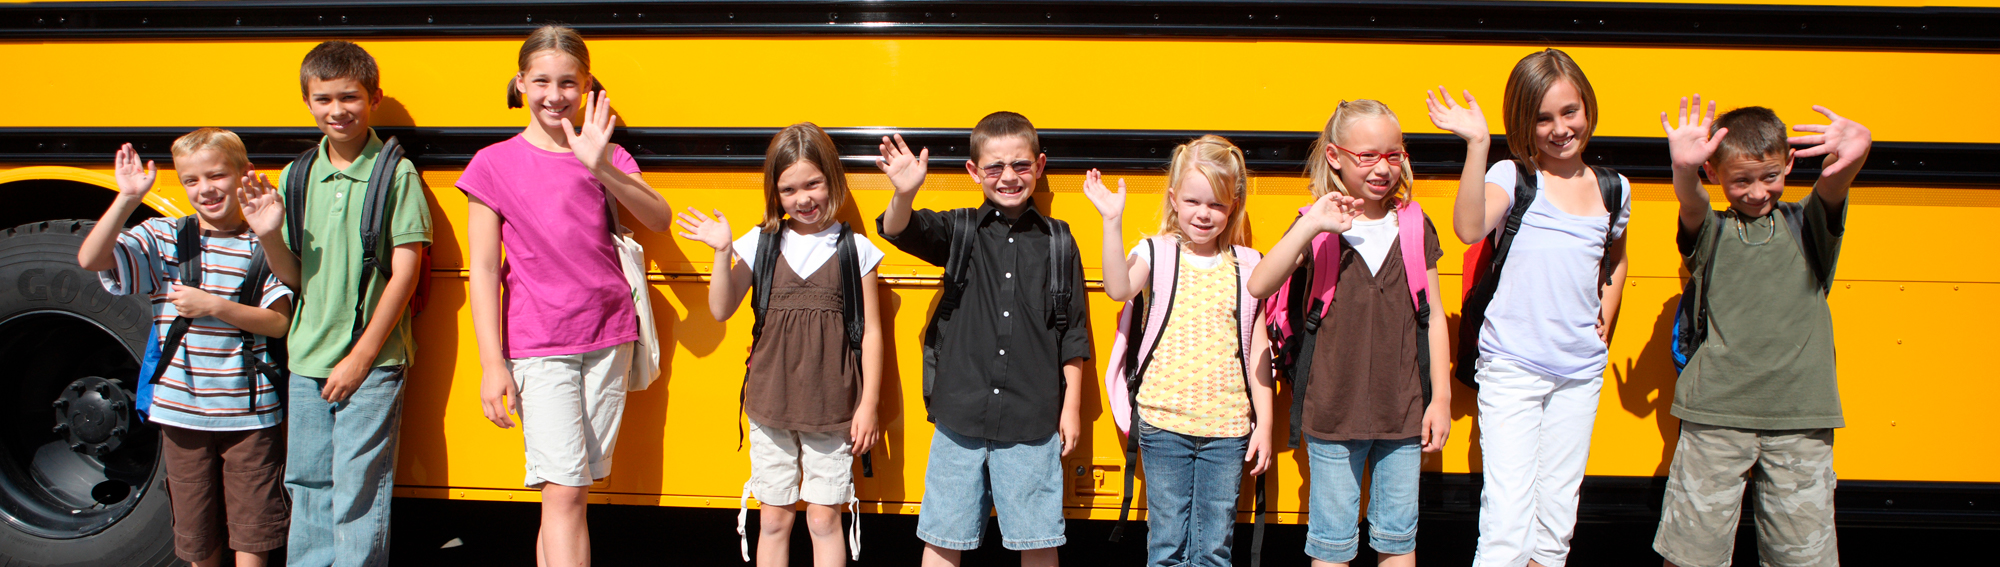 students standing in front of a bus waving